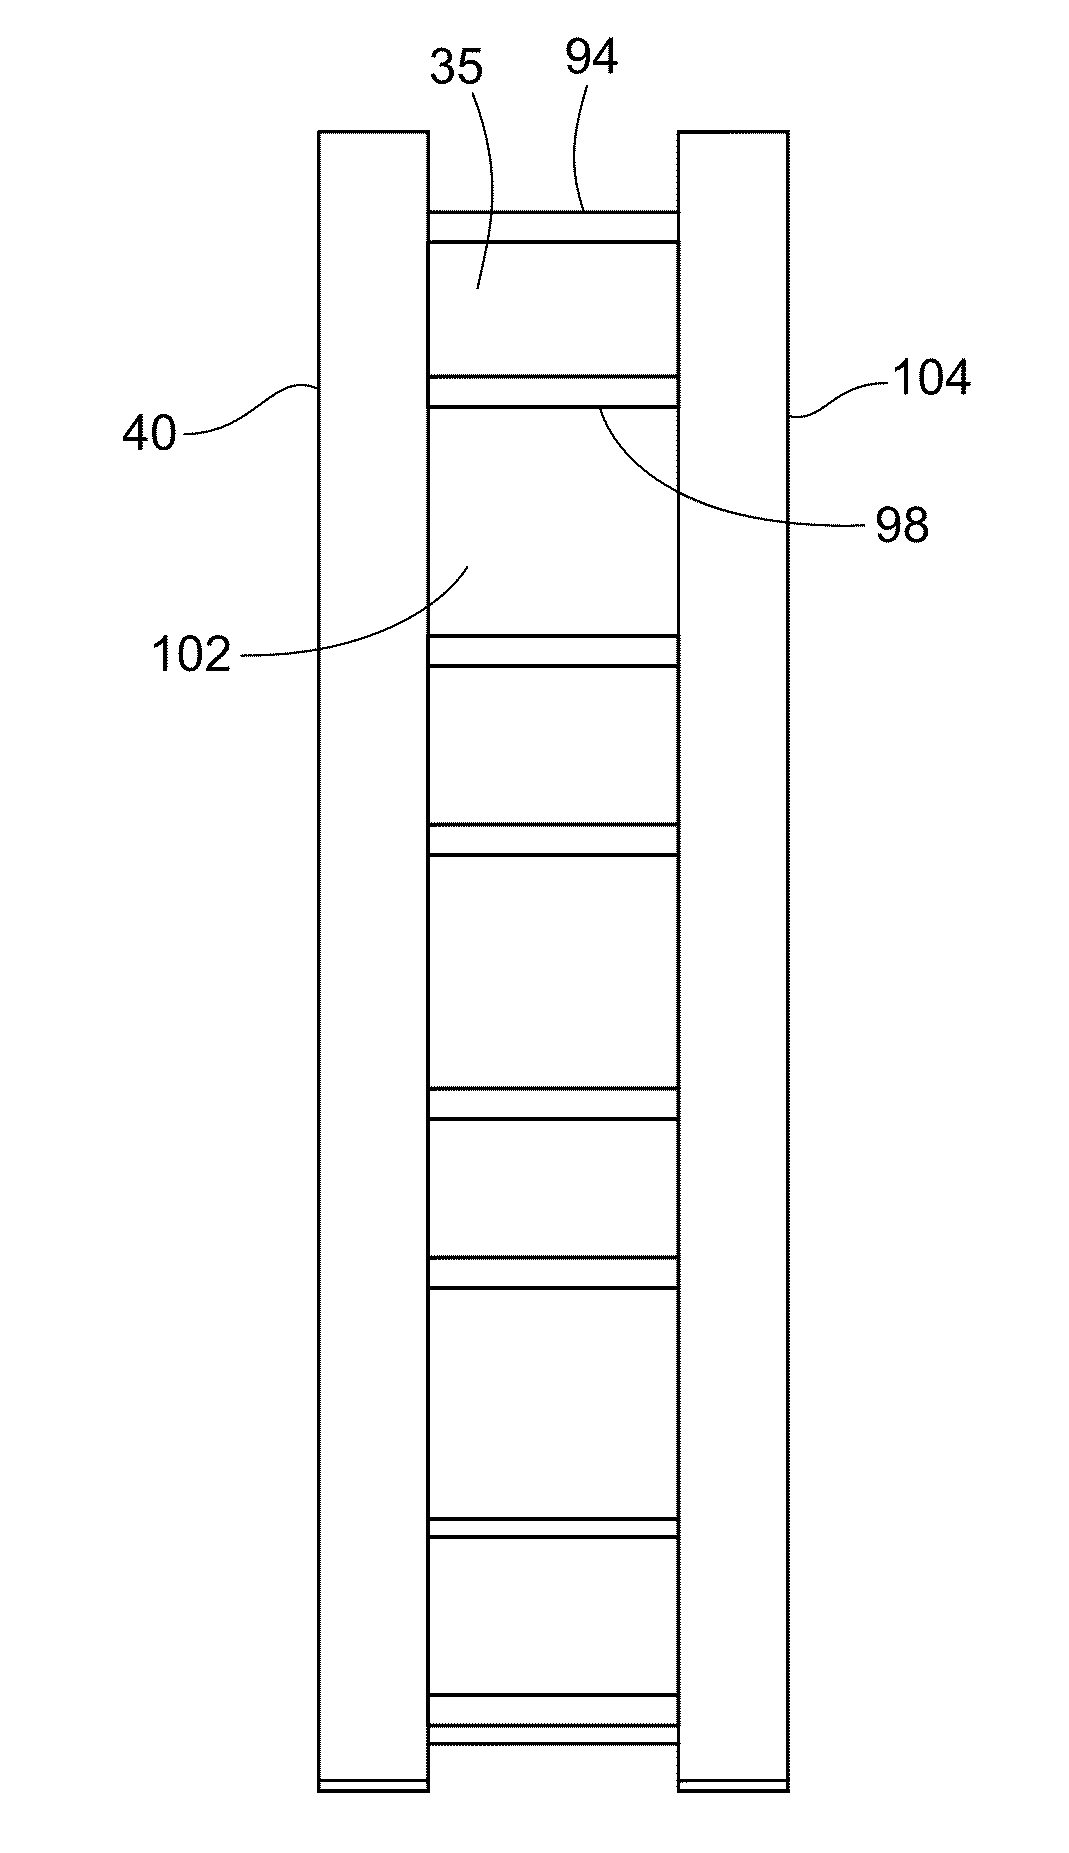 Nanoscale High-Aspect-Ratio Metallic Structure and Method of Manufacturing Same